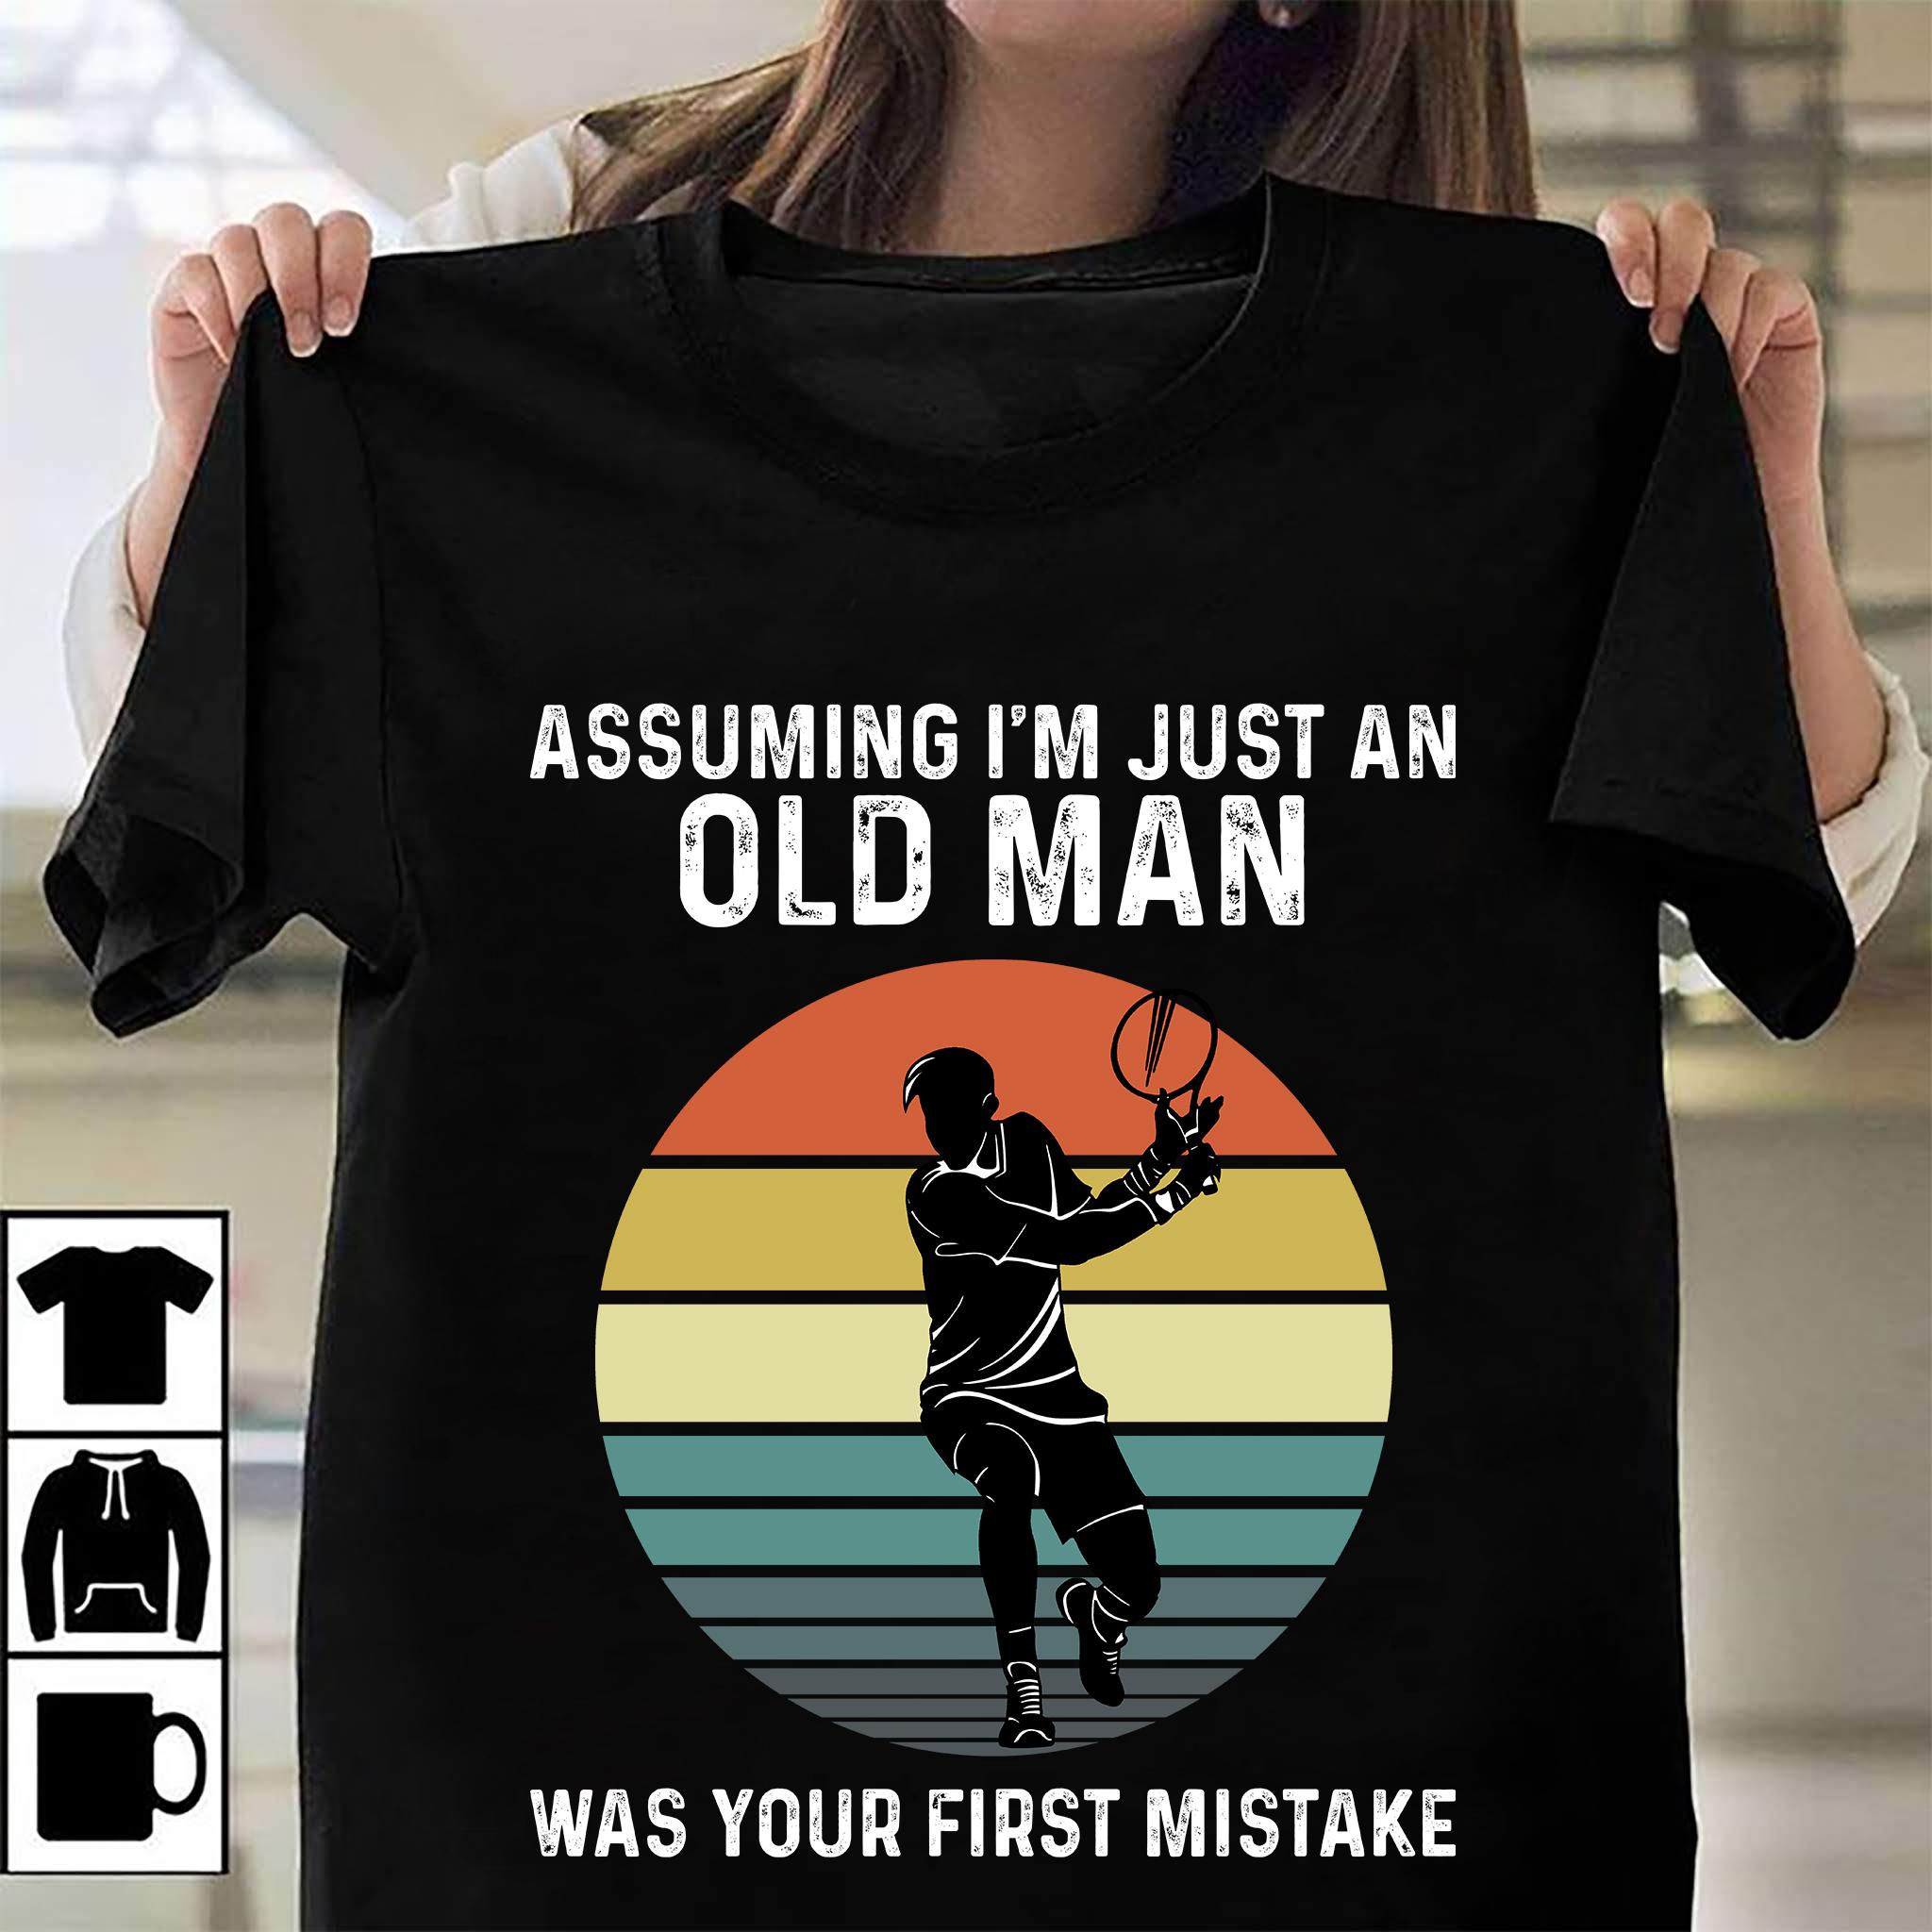 Assuming I'm just an old man was your first mistake - Old man tennis player, gift for tennis player